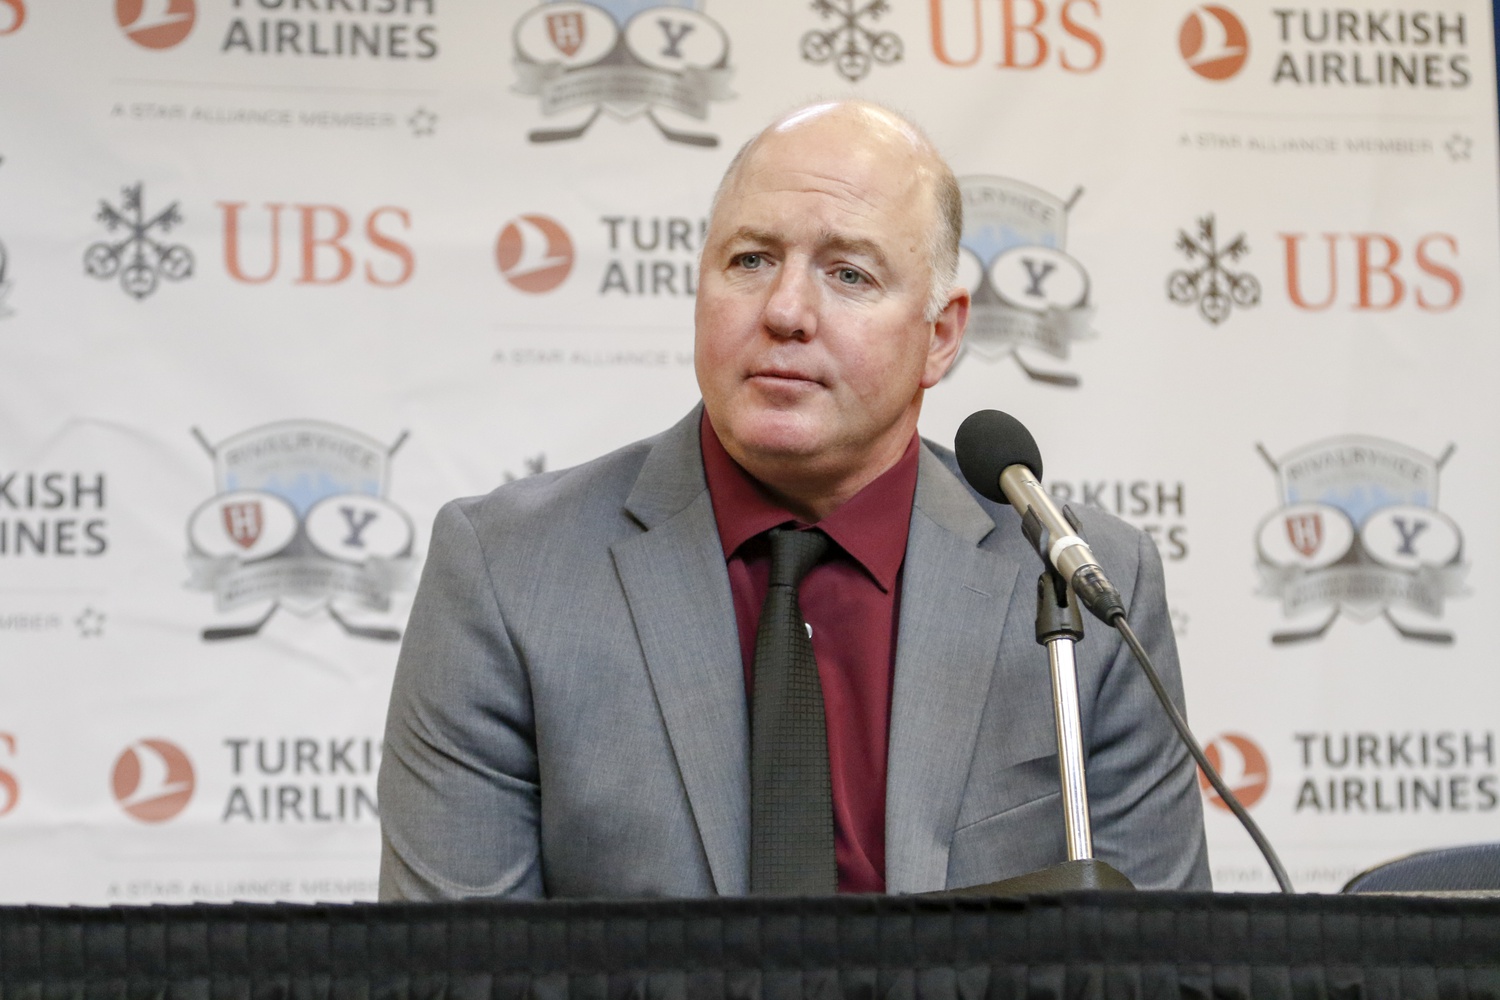 Harvard head coach Ted Donato at a postgame press conference after the Crimson beat Yale 7-0 on January 11, 2020 at Madison Square Garden.